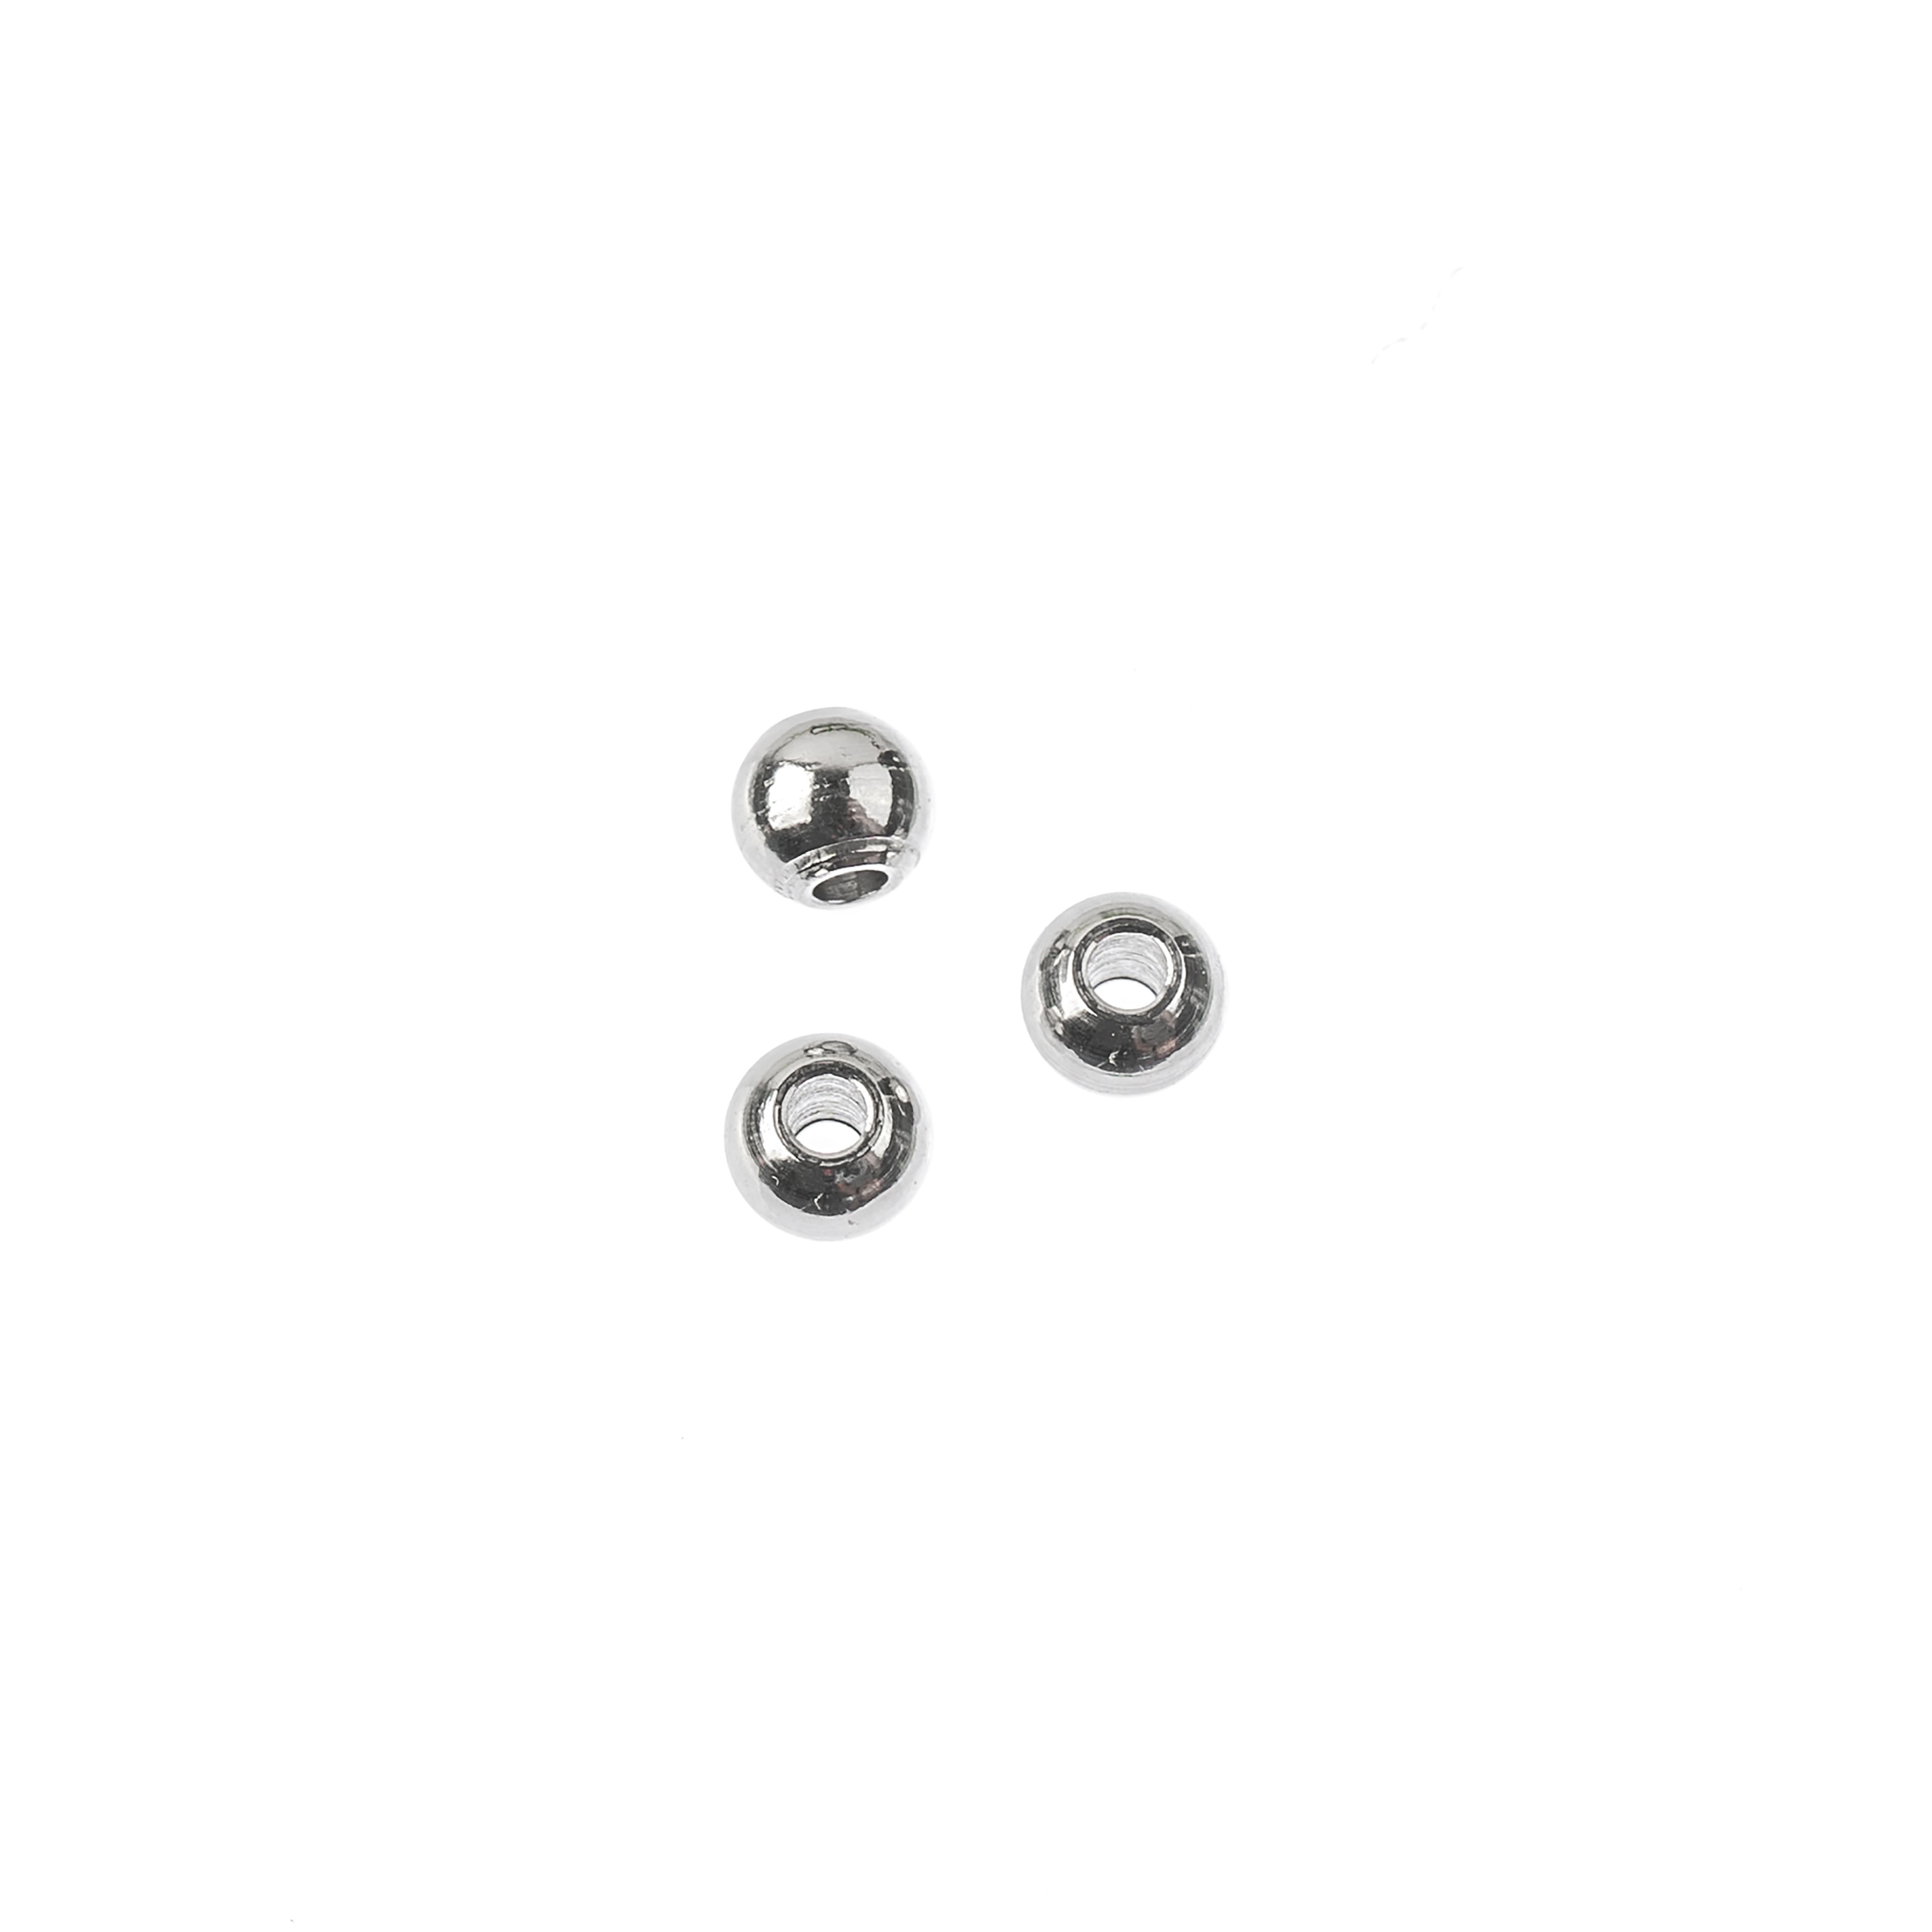 3mm Spacer Beads by Bead Landing™, Michaels